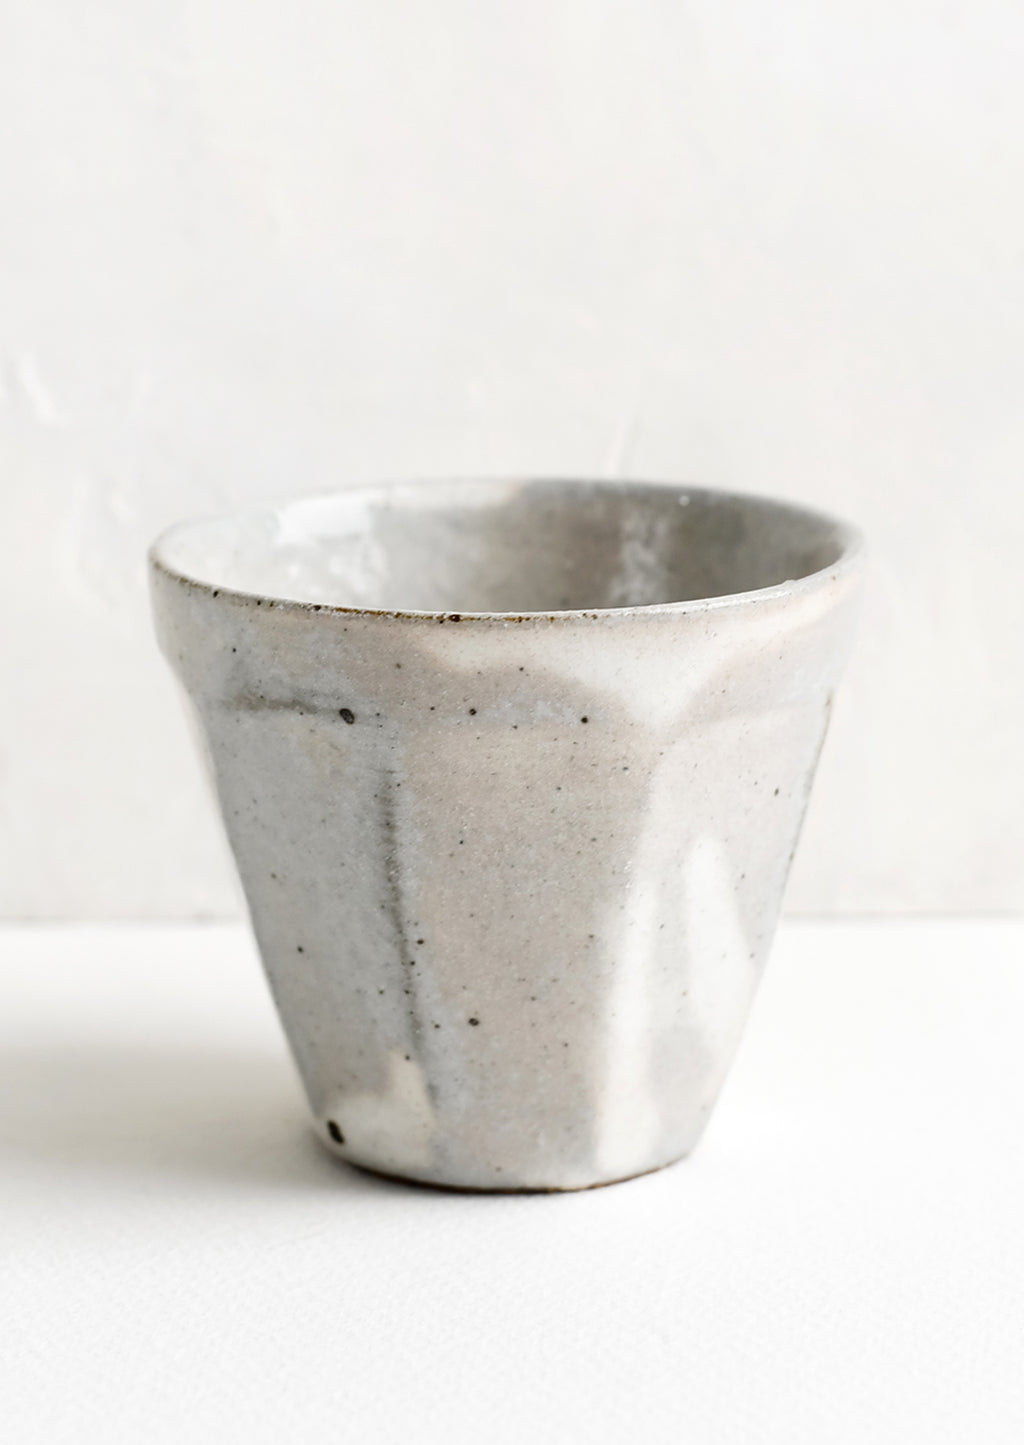 1: Small ceramic cups with faceted design.